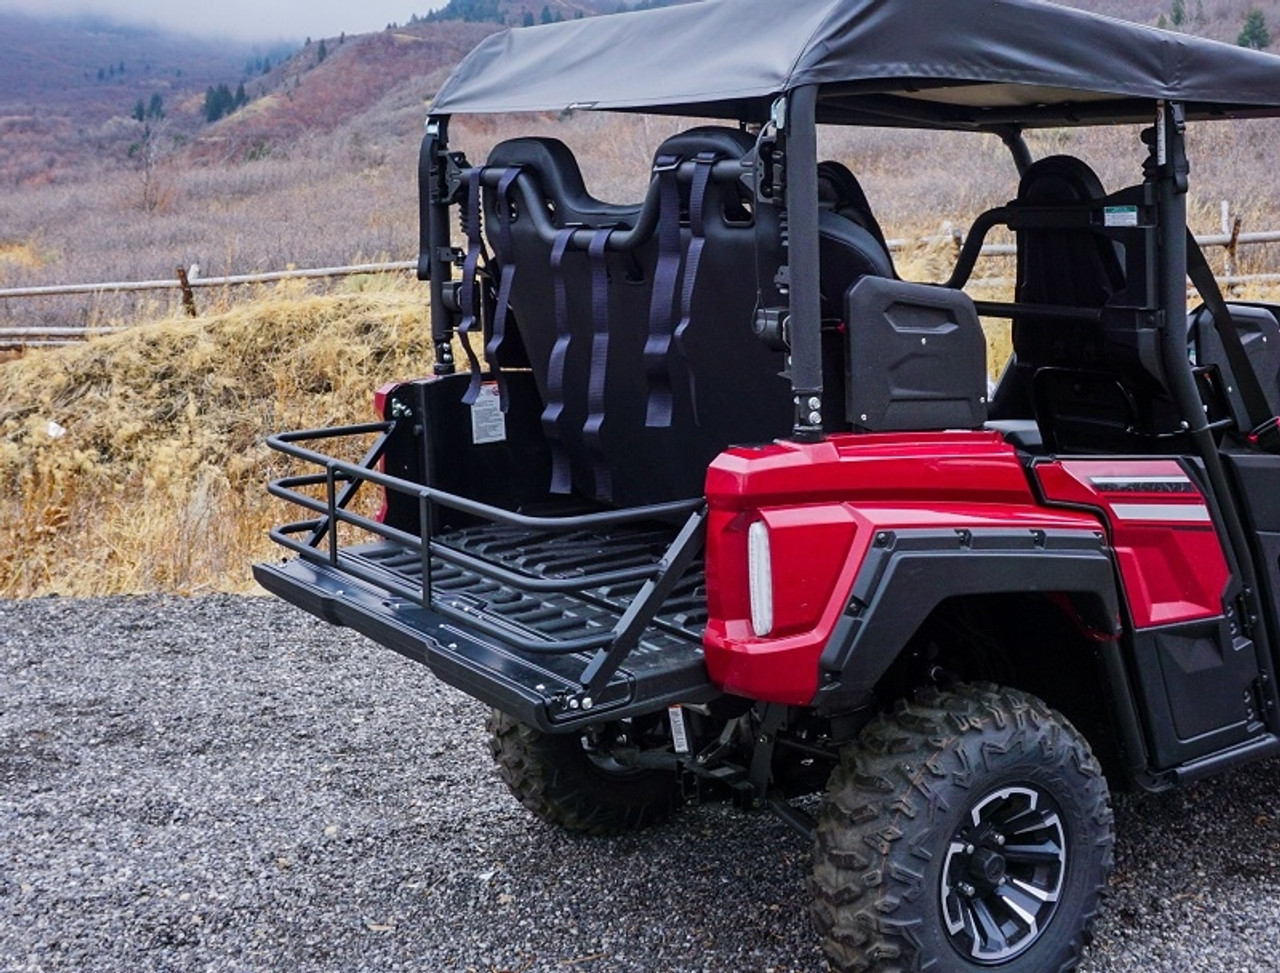 An image of the Yamaha Wolverine X4/Rmax4 Bed Extender by UTV Mountain Accessories, installed on a UTV that is parked on a gravel trail.